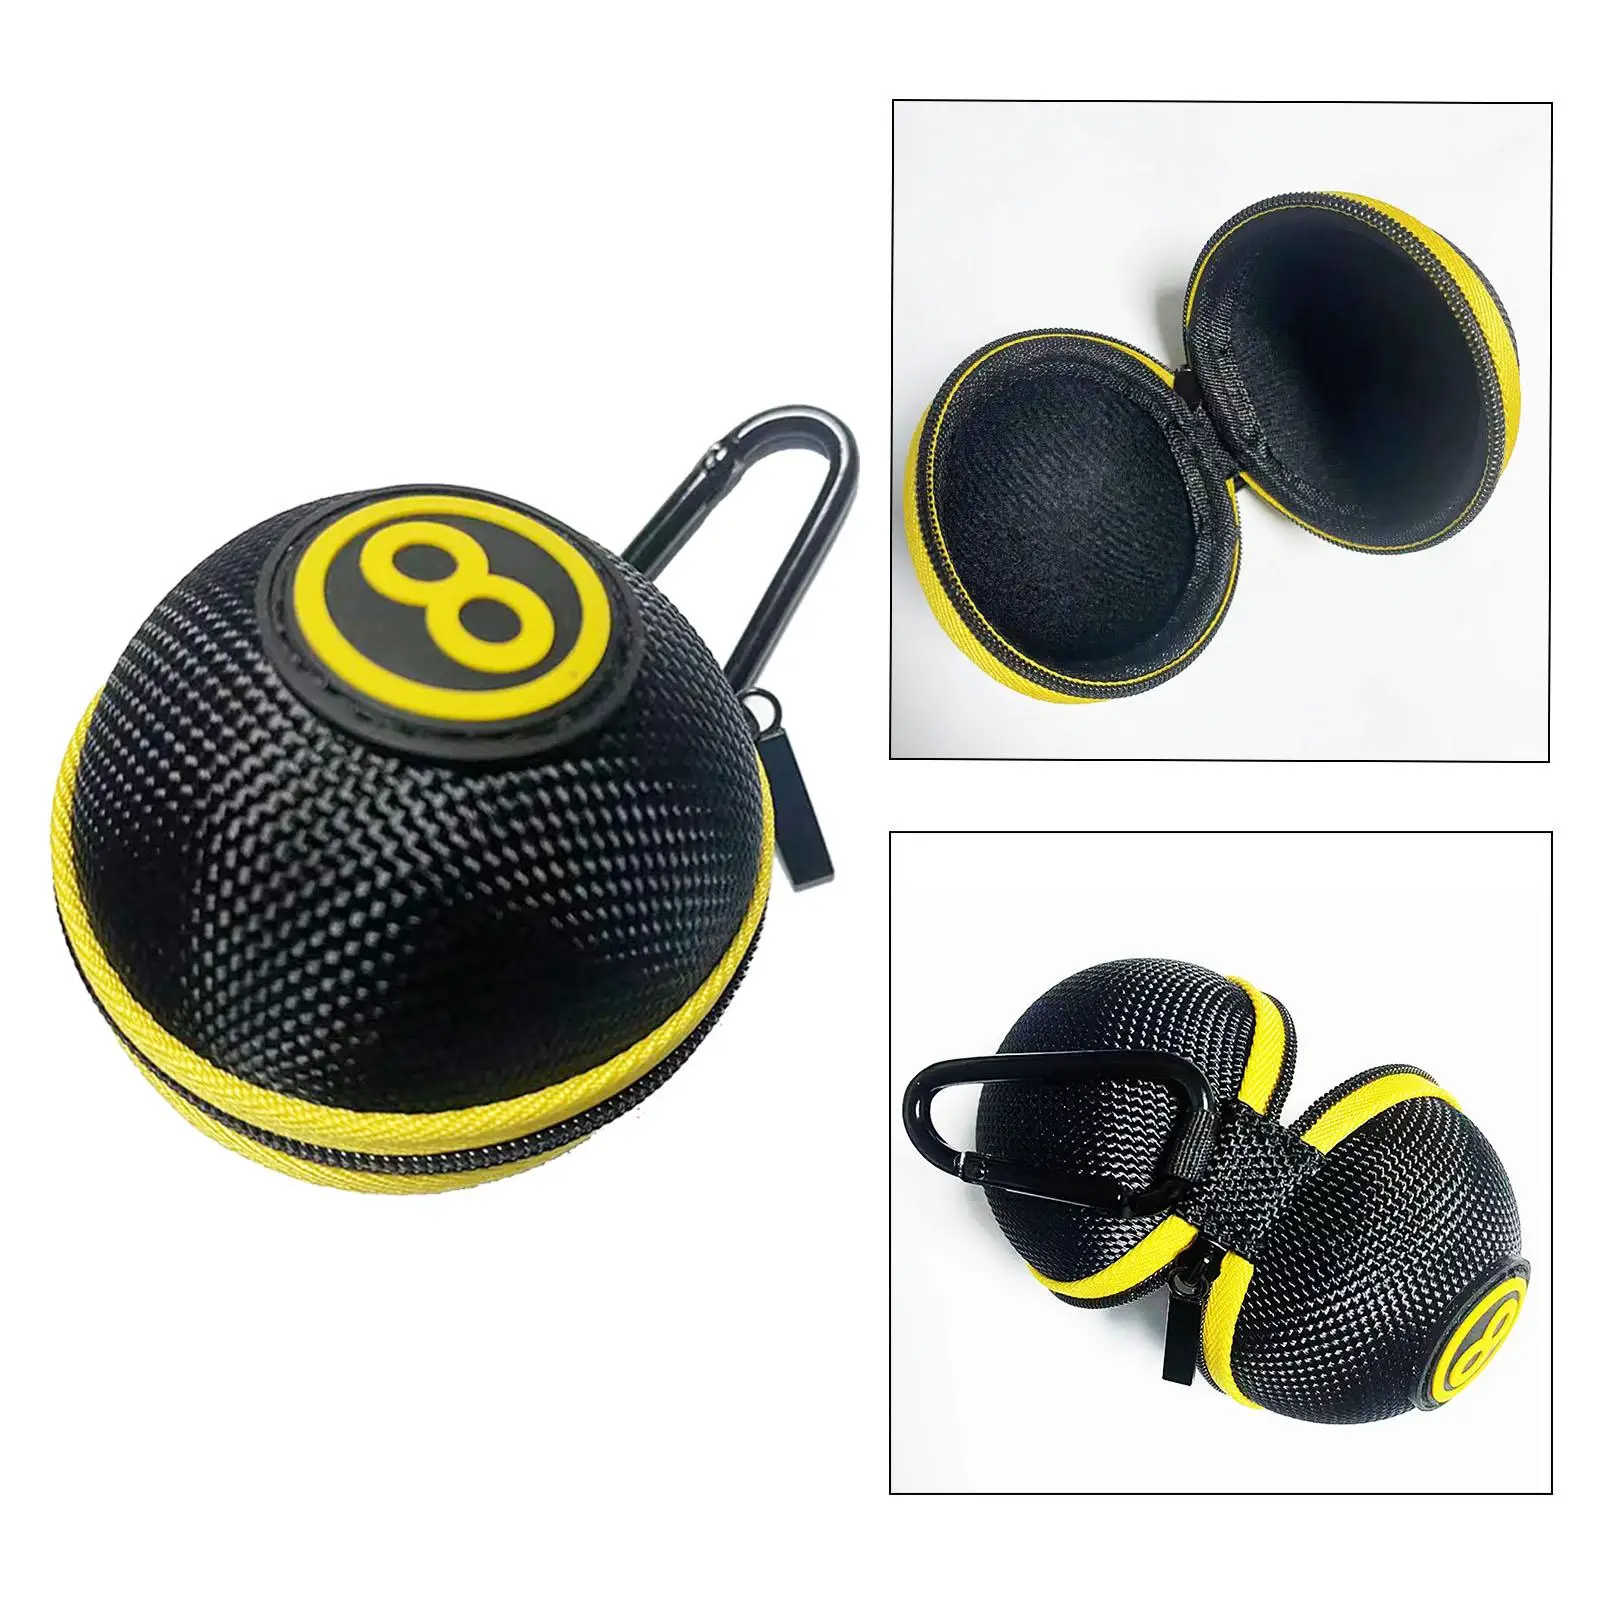 Cue Ball Case Protector Holder Protective Cover Training Balls Cue Chalk Bag